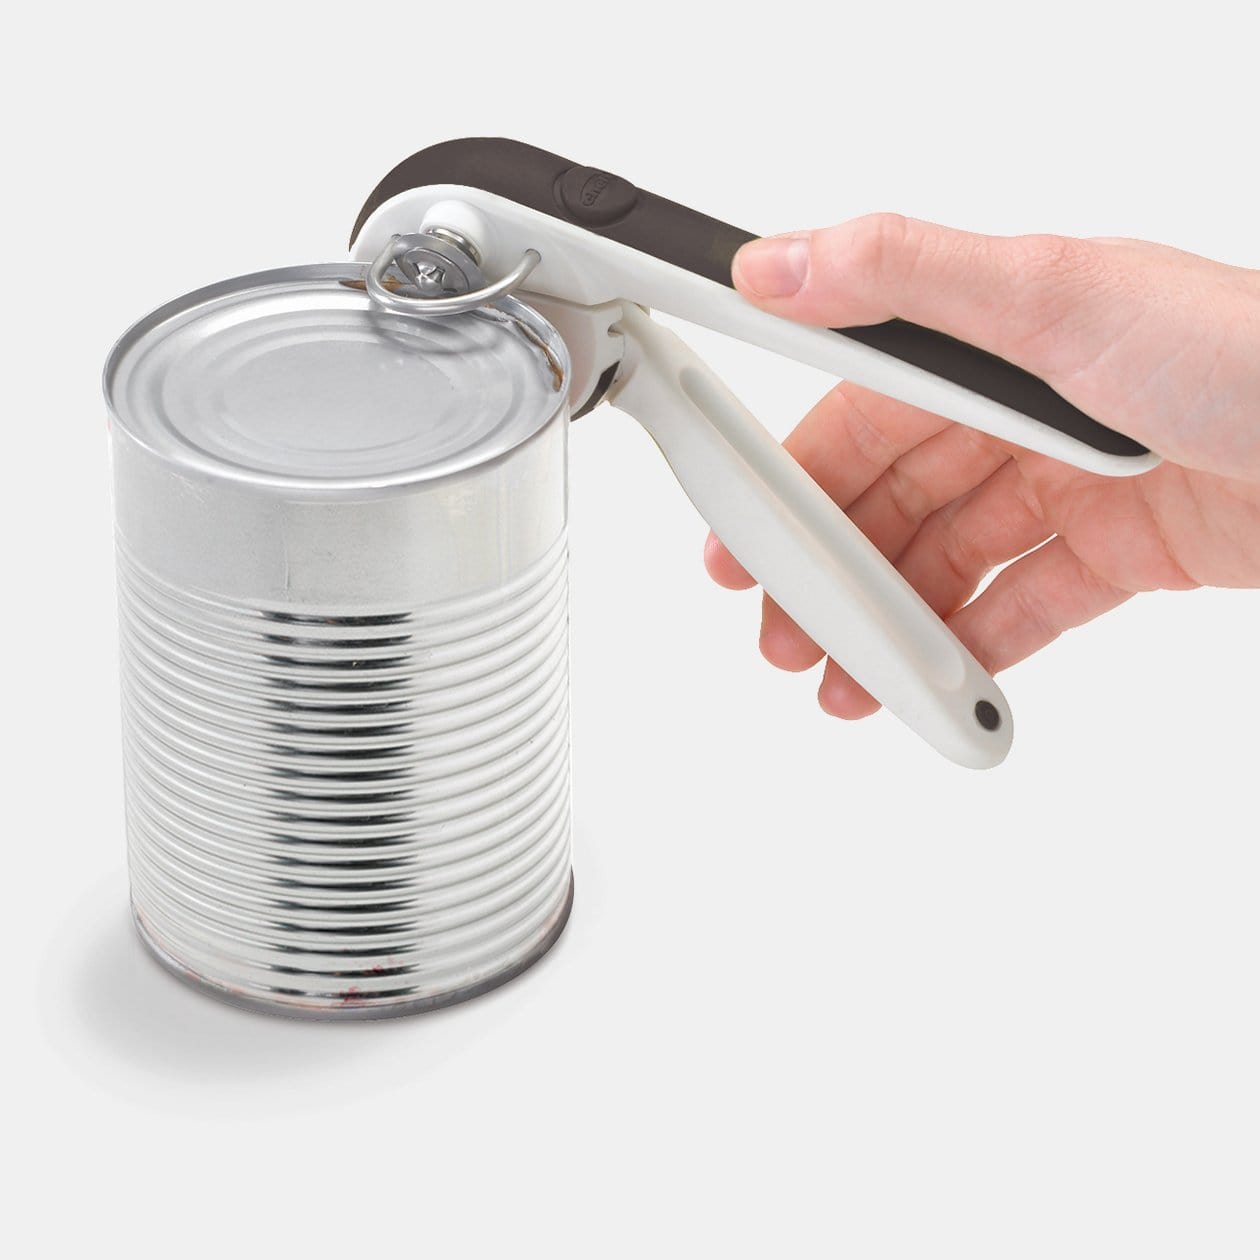 Chef'n EzSqueeze One-Handed Can Opener